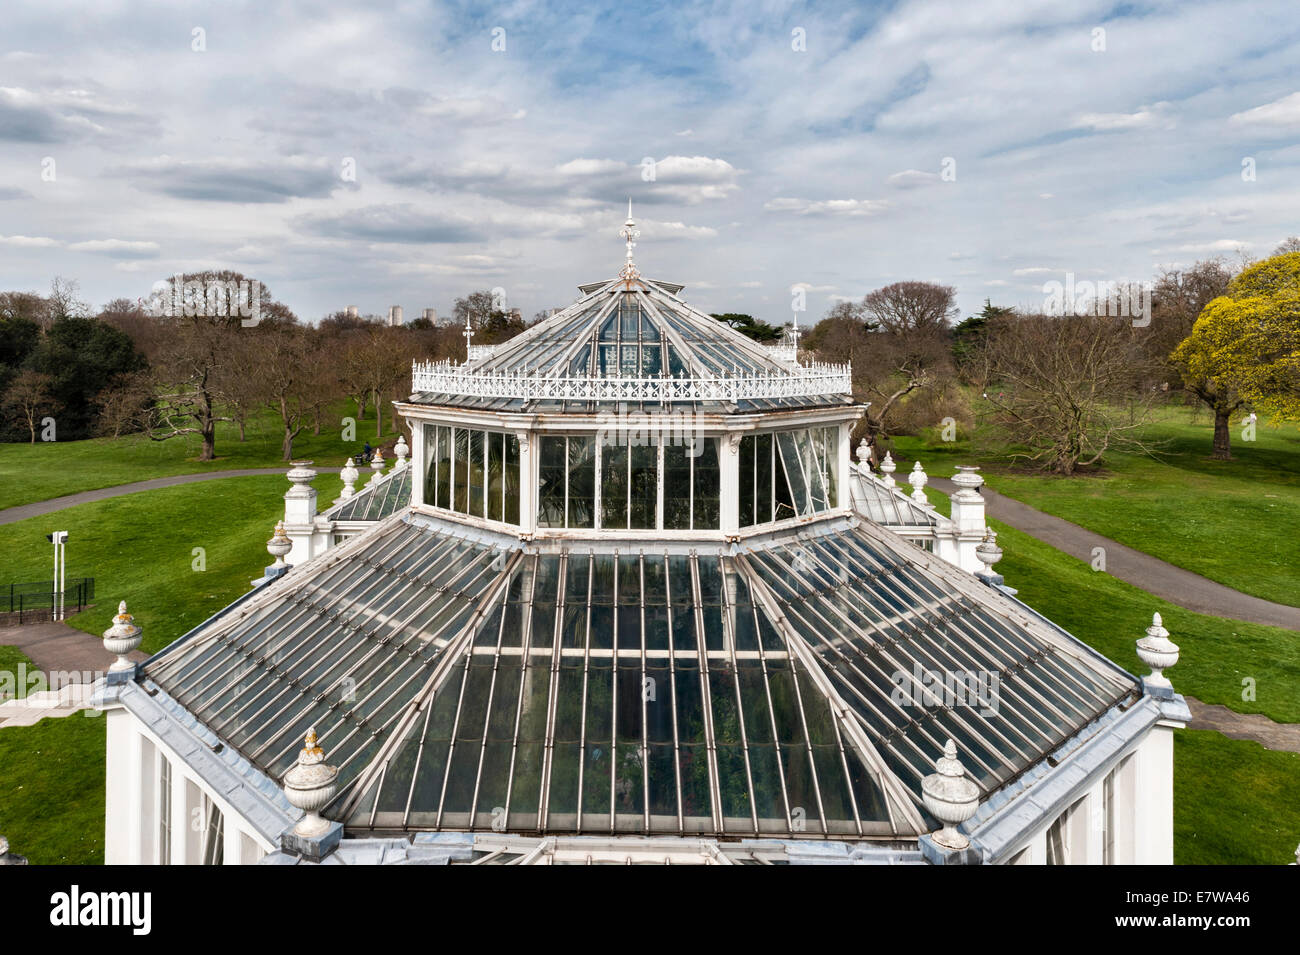 The Royal Botanic Gardens, Kew, London, UK. The roof of the wrought iron and glass Temperate House, built by Decimus Burton, which opened in 1863 Stock Photo